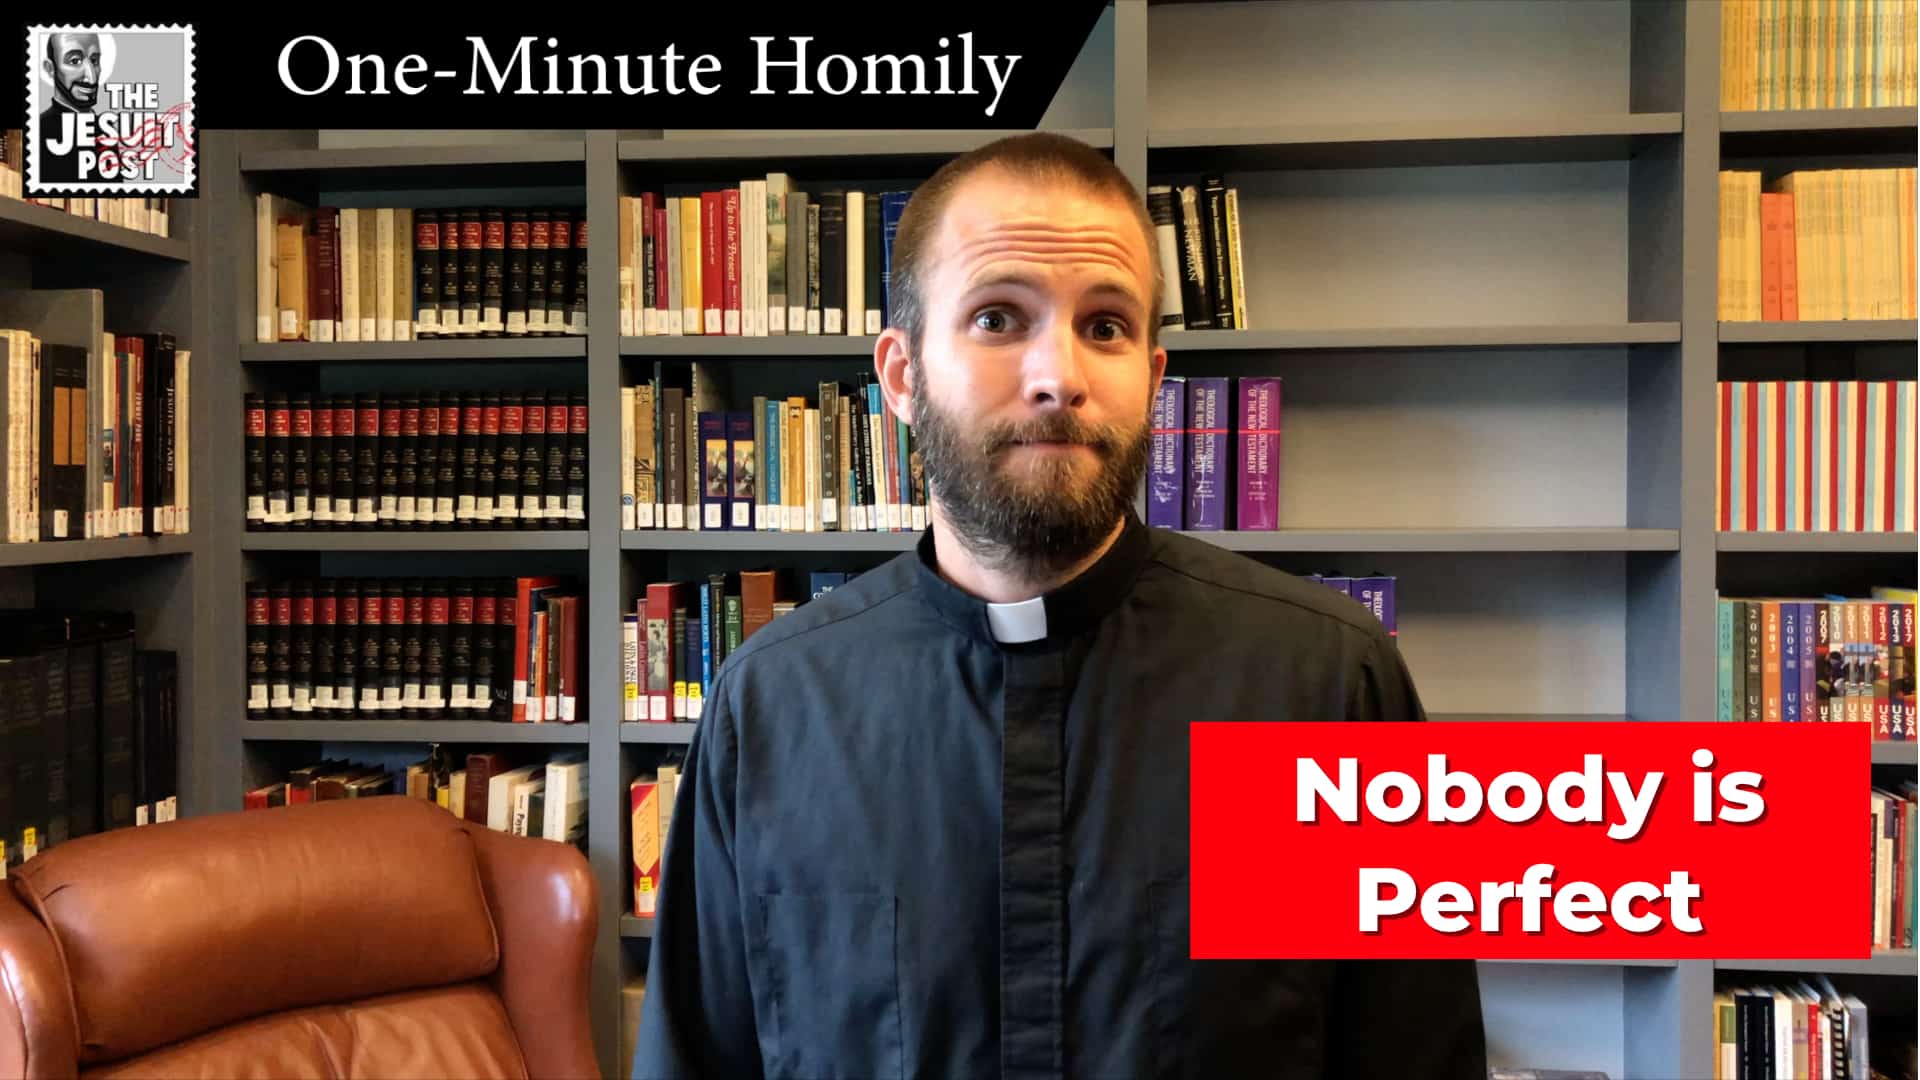 One-Minute Homily: “Nobody is Perfect”